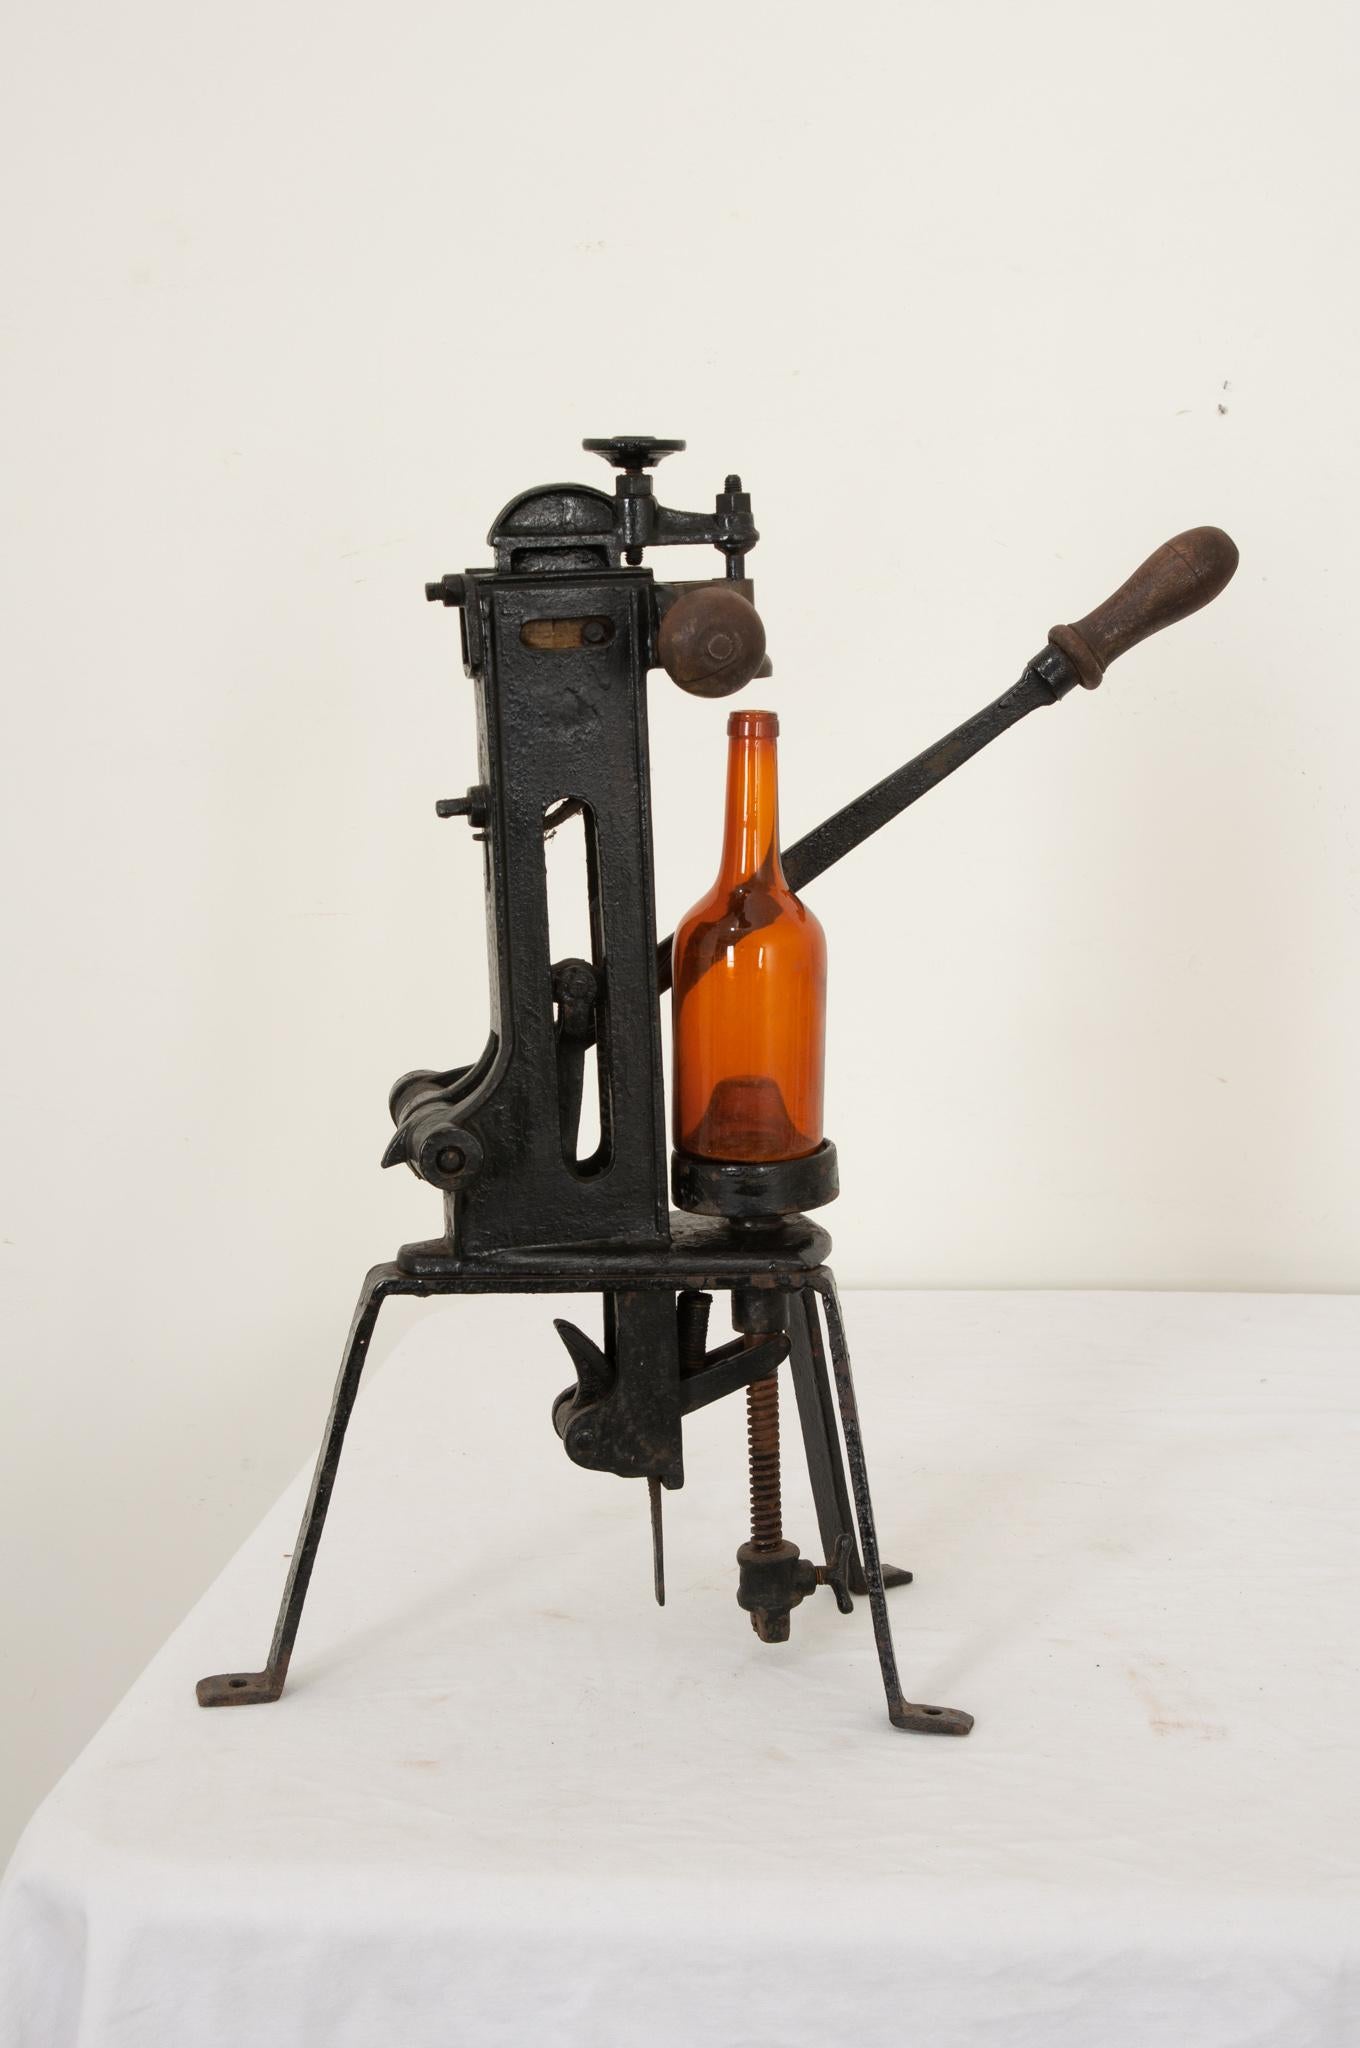 An interesting part of 19th century history is brought back to life with this rare French cast iron pharmaceutical bottle corker circa 1870. We are reminded of the craft and tools used to bottle medicines in a 19th century apothecary or hospital by